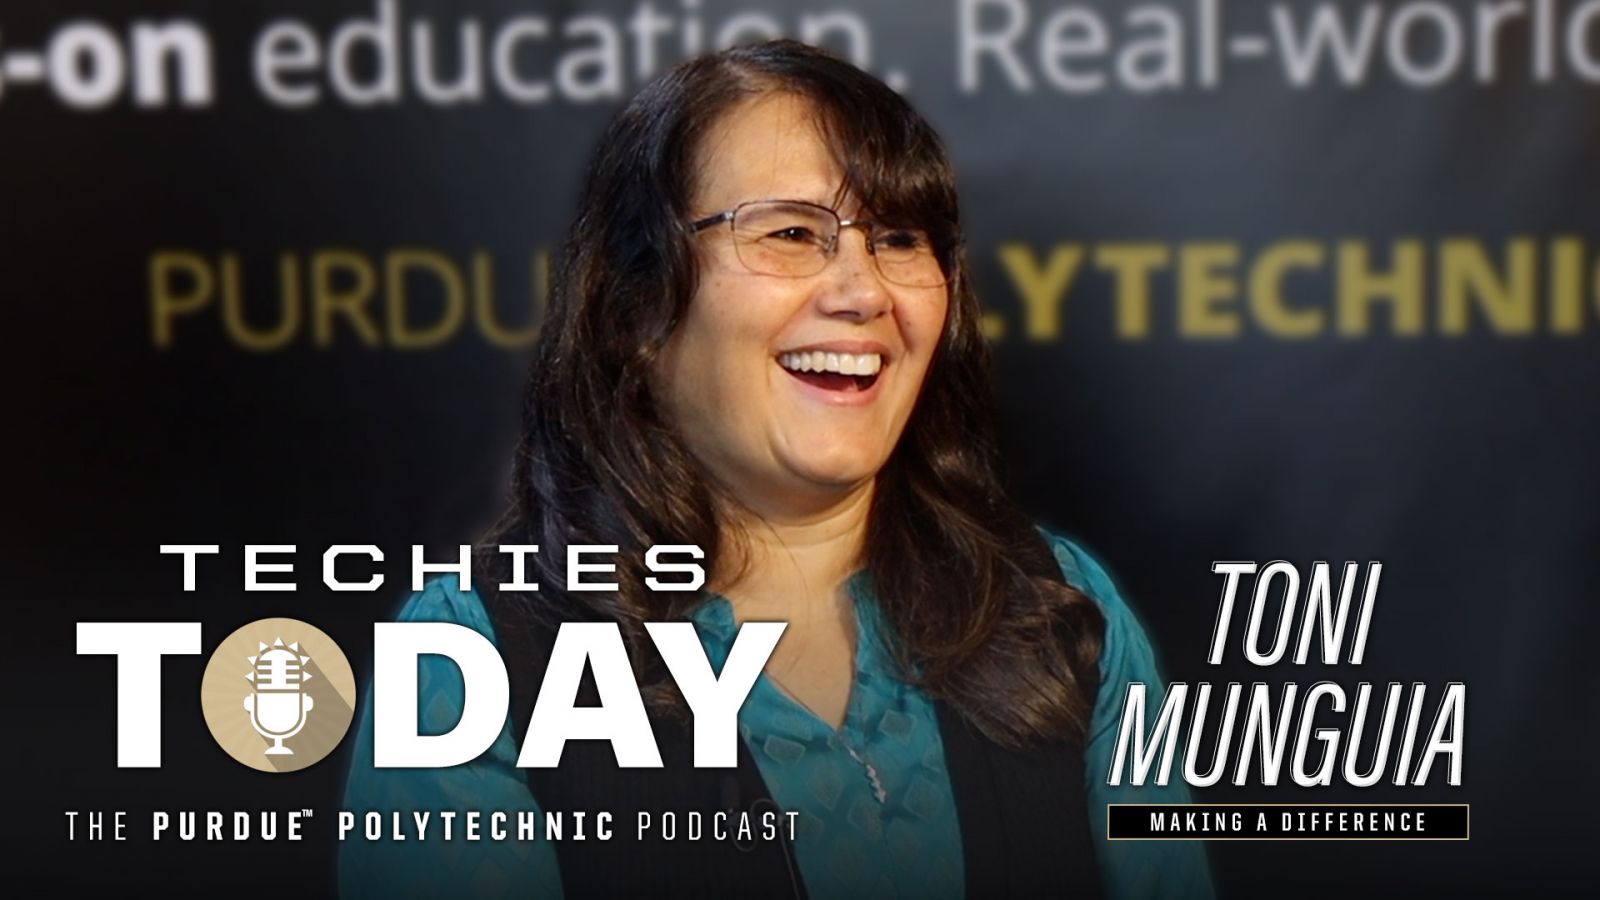 Toni Munguia, Making a Difference, on Techies Today, the Purdue Polytechnic Podcast